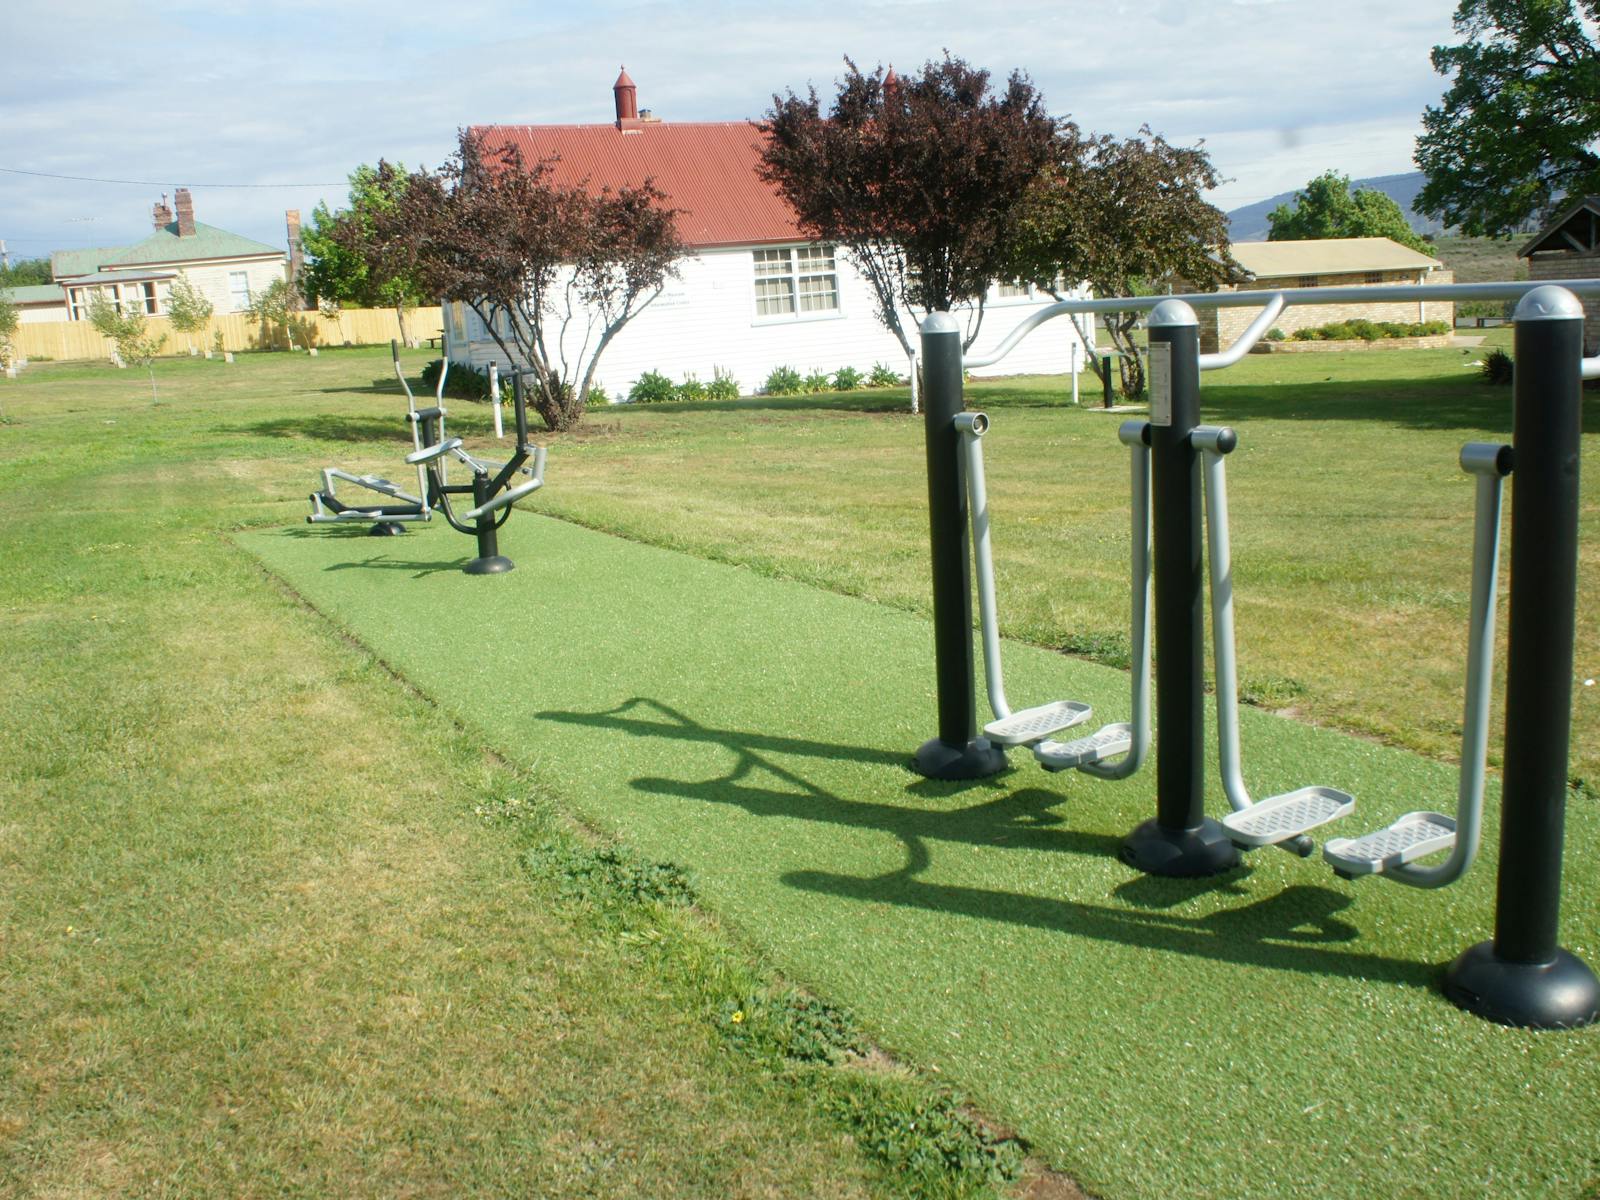 Gym equipment in the park